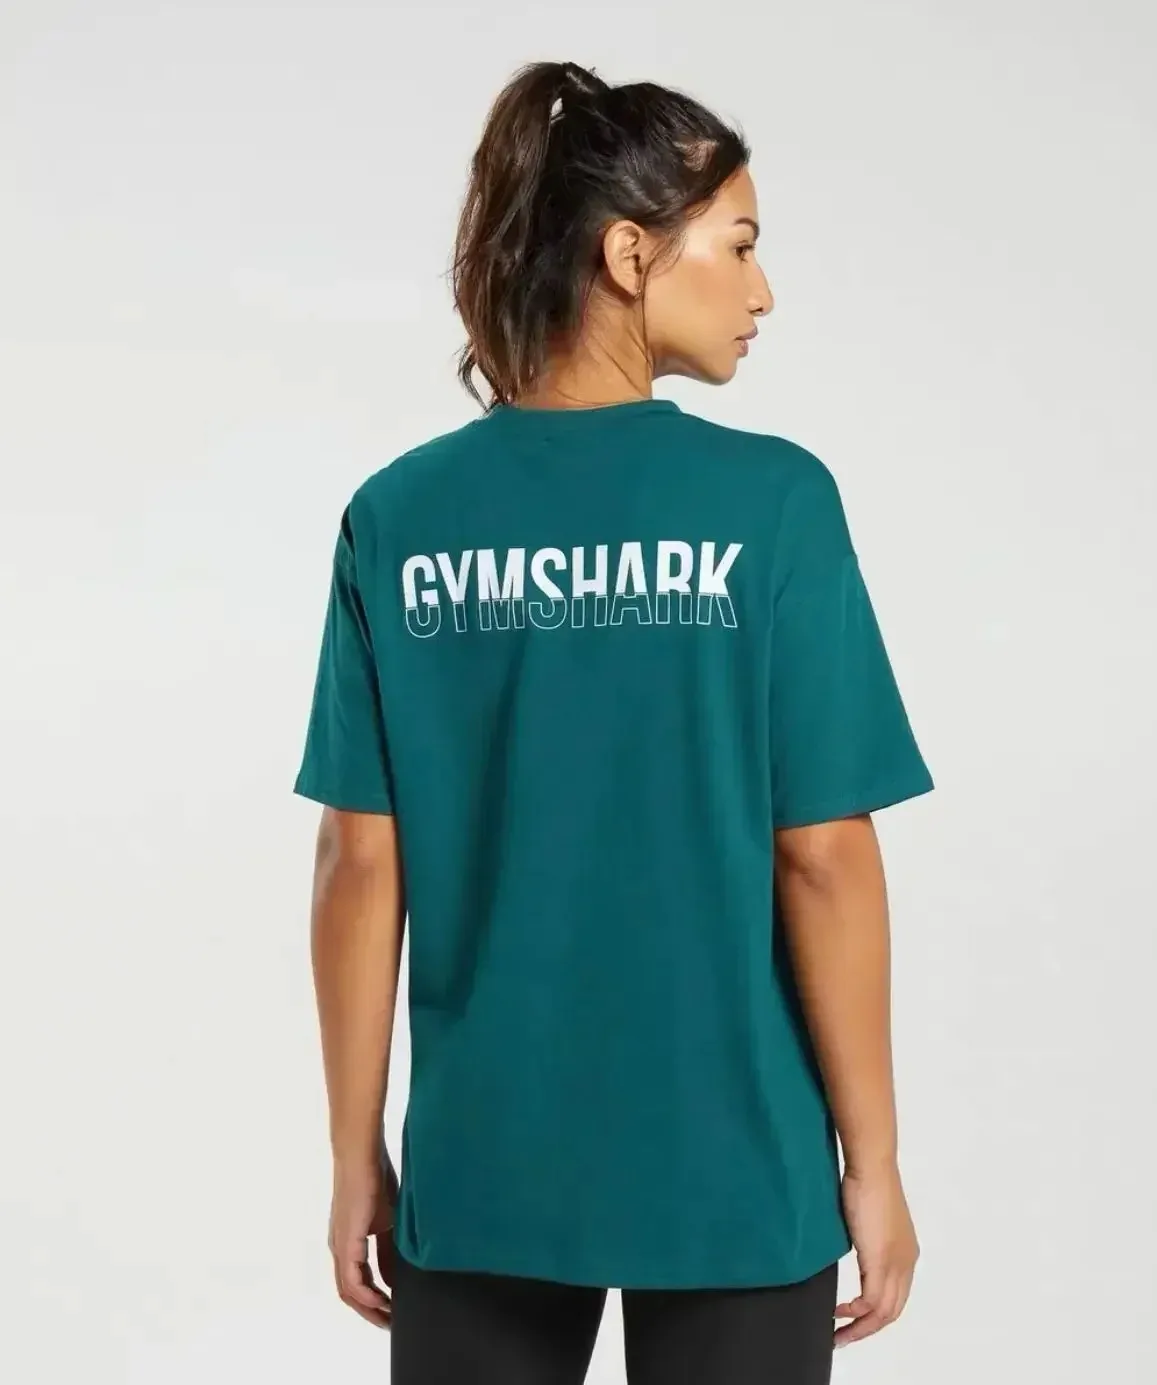 Large Size European American Men's Women Muscle Shark Street Fitness GymShark Short Sleeved Outdoor Parent-child Sports Kid Size-animated-img